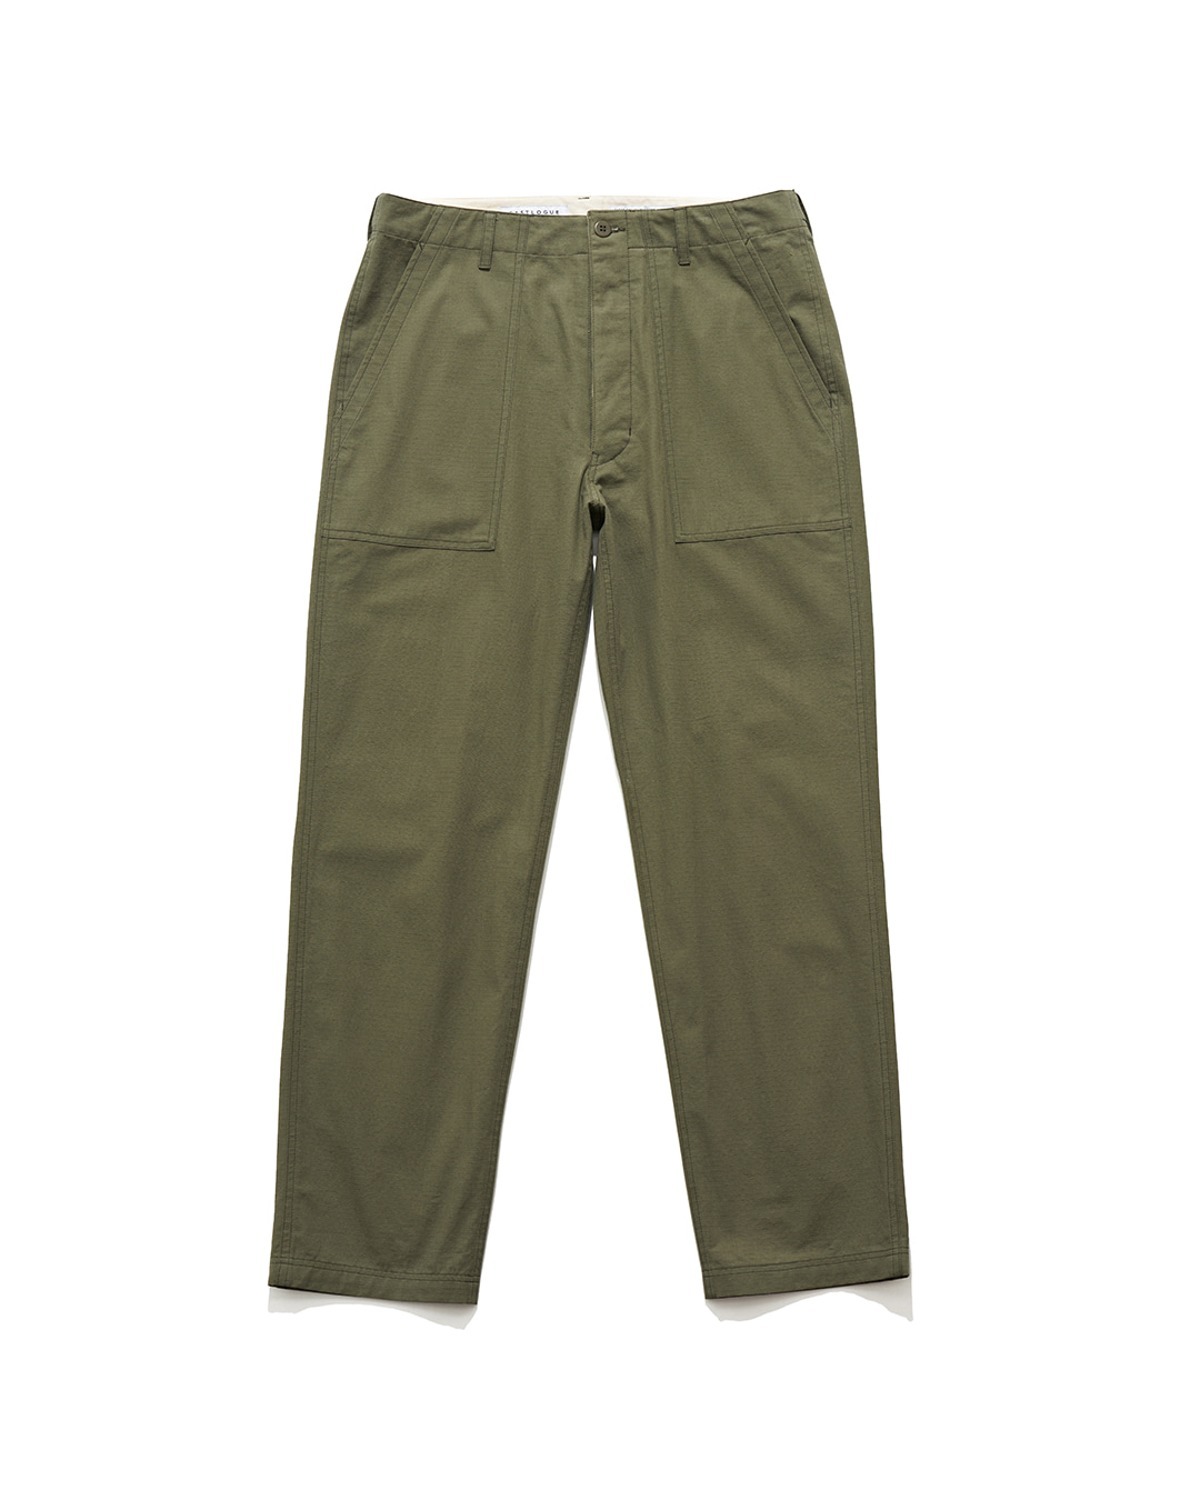 FATIGUE PANTS / OLIVE RIPSTOP